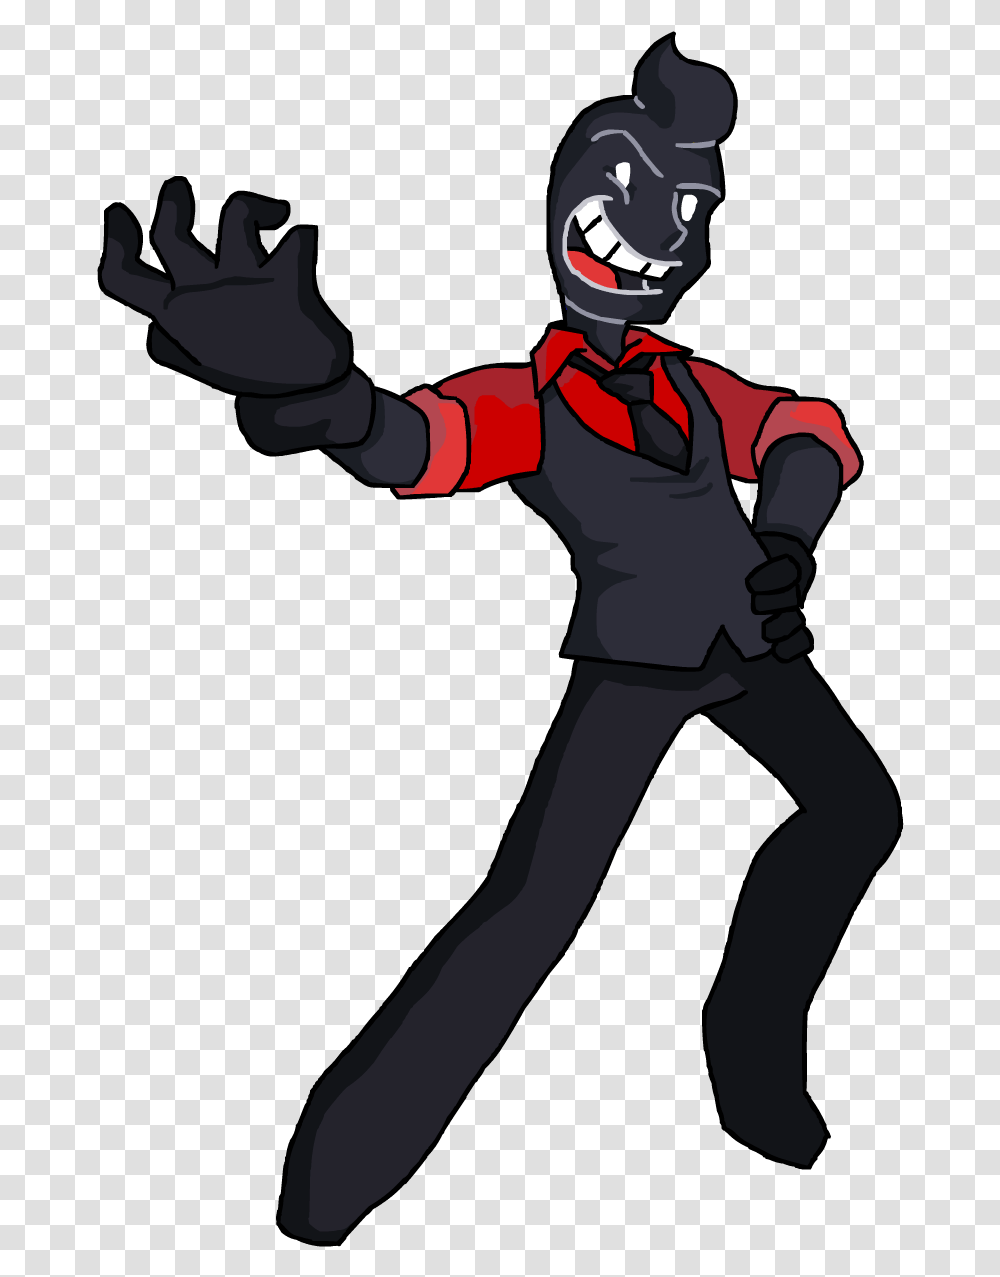 The Leader Of Group People Who Play Video Games Cartoon Cartoon, Ninja, Costume, Person, Clothing Transparent Png